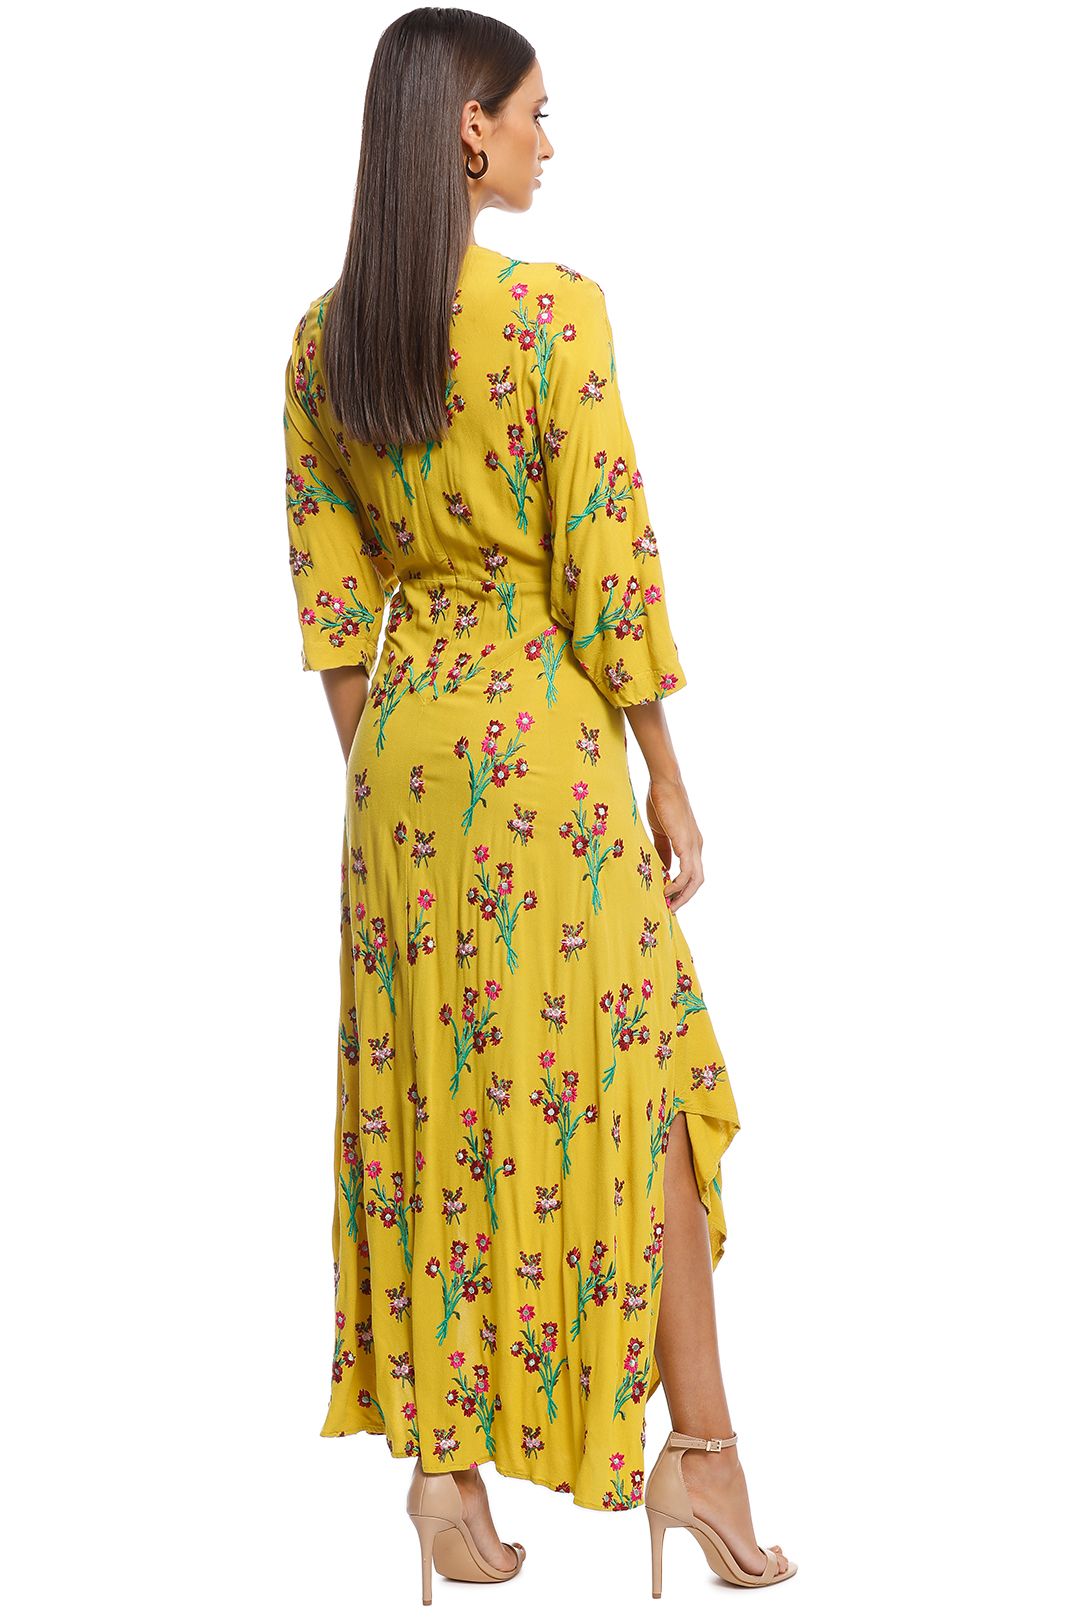 Trelise Cooper - Eat Drink Be Maxi Dress - Yellow - Back